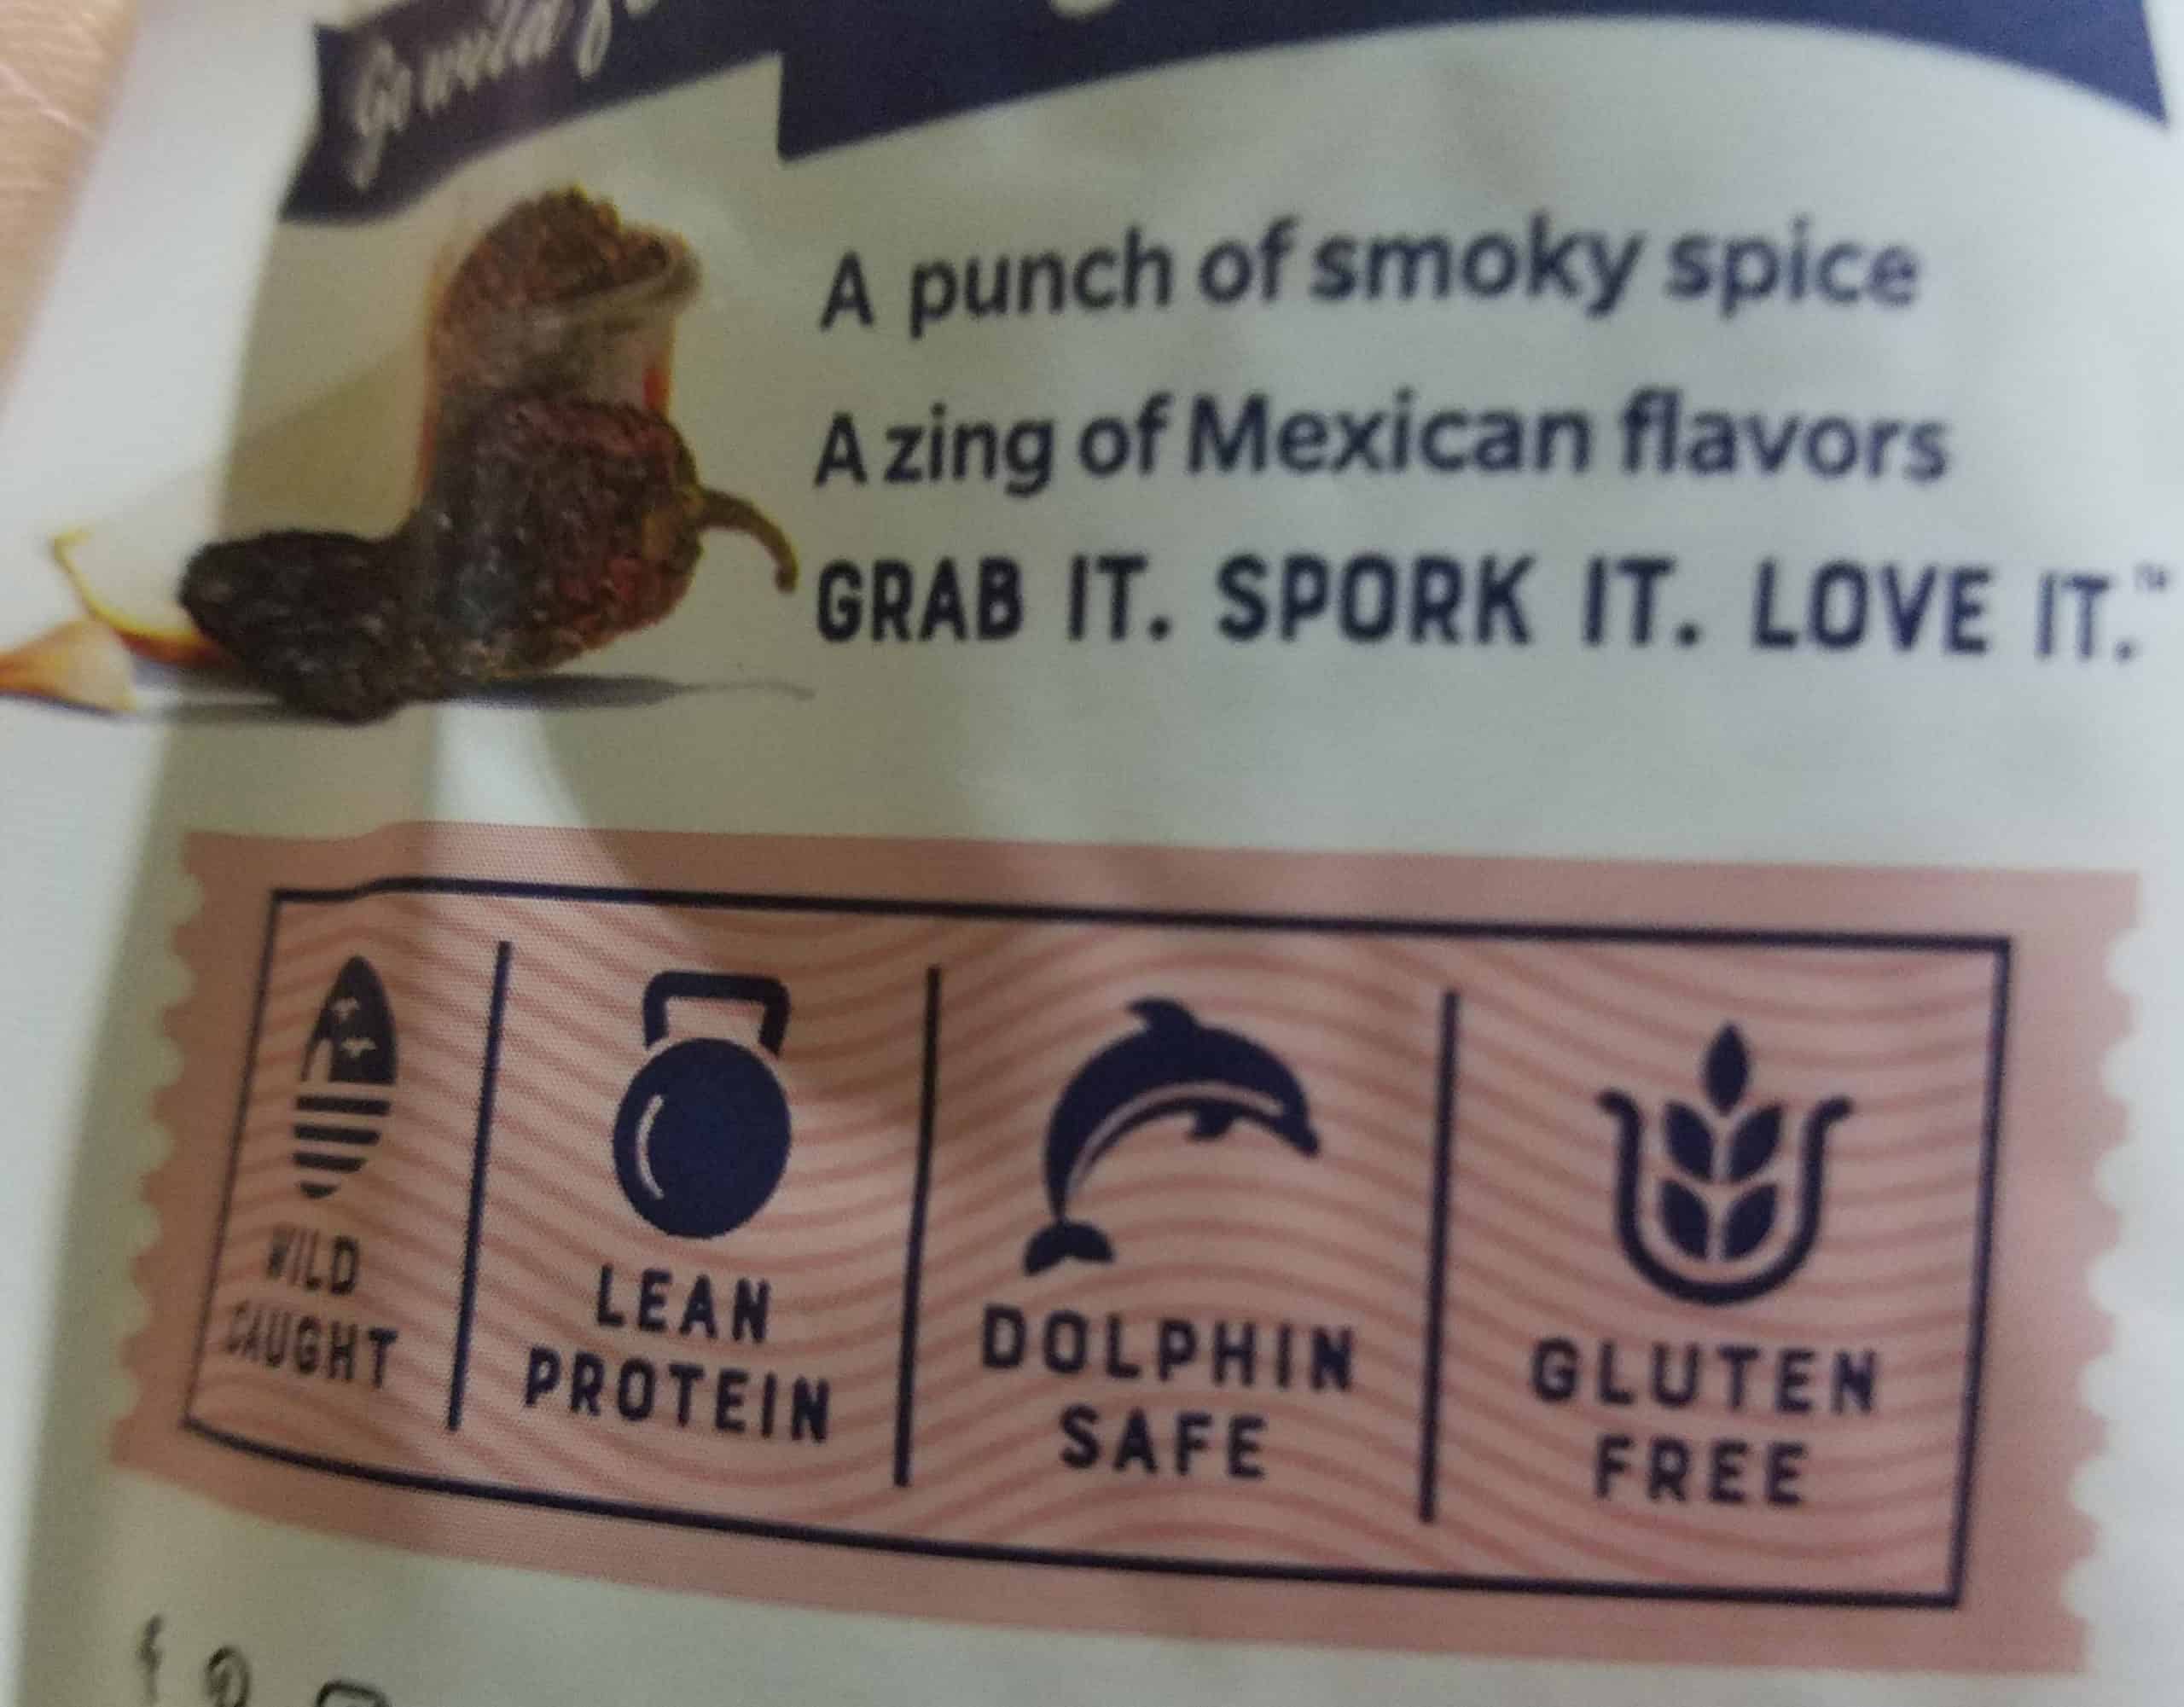 Dolphin Safe Label